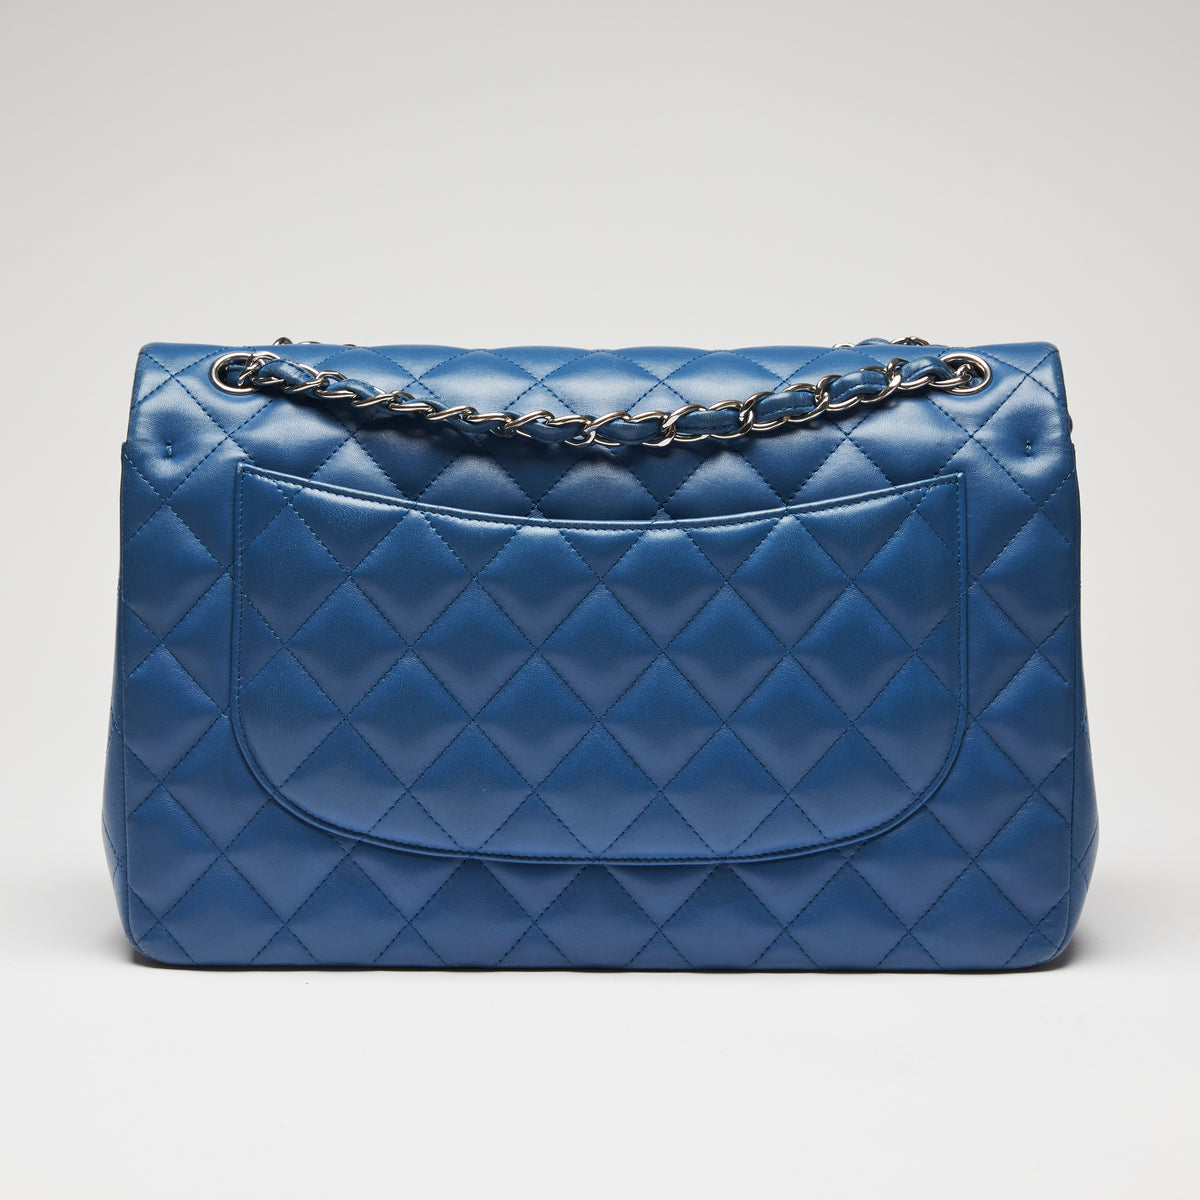 Pre-Loved Bright Blue Lambskin Large Double Flap Bag with Silver Hardware. (back)